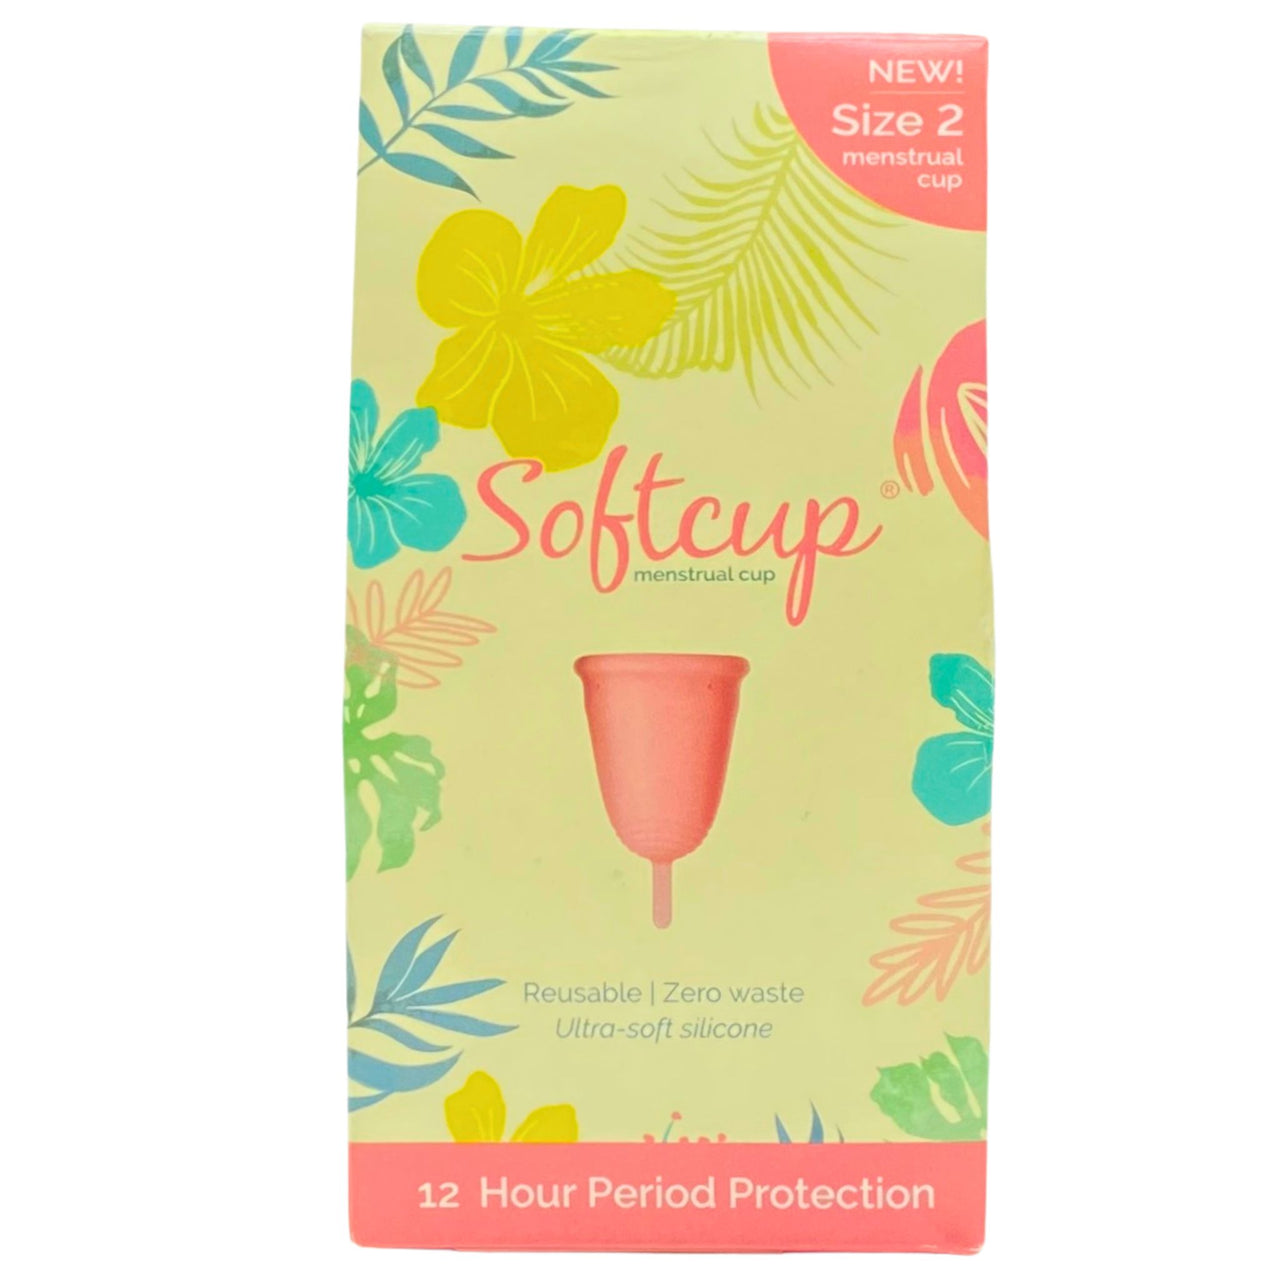 SoftCup Menstrual Cup Reusable Zero Waste Ultra Soft